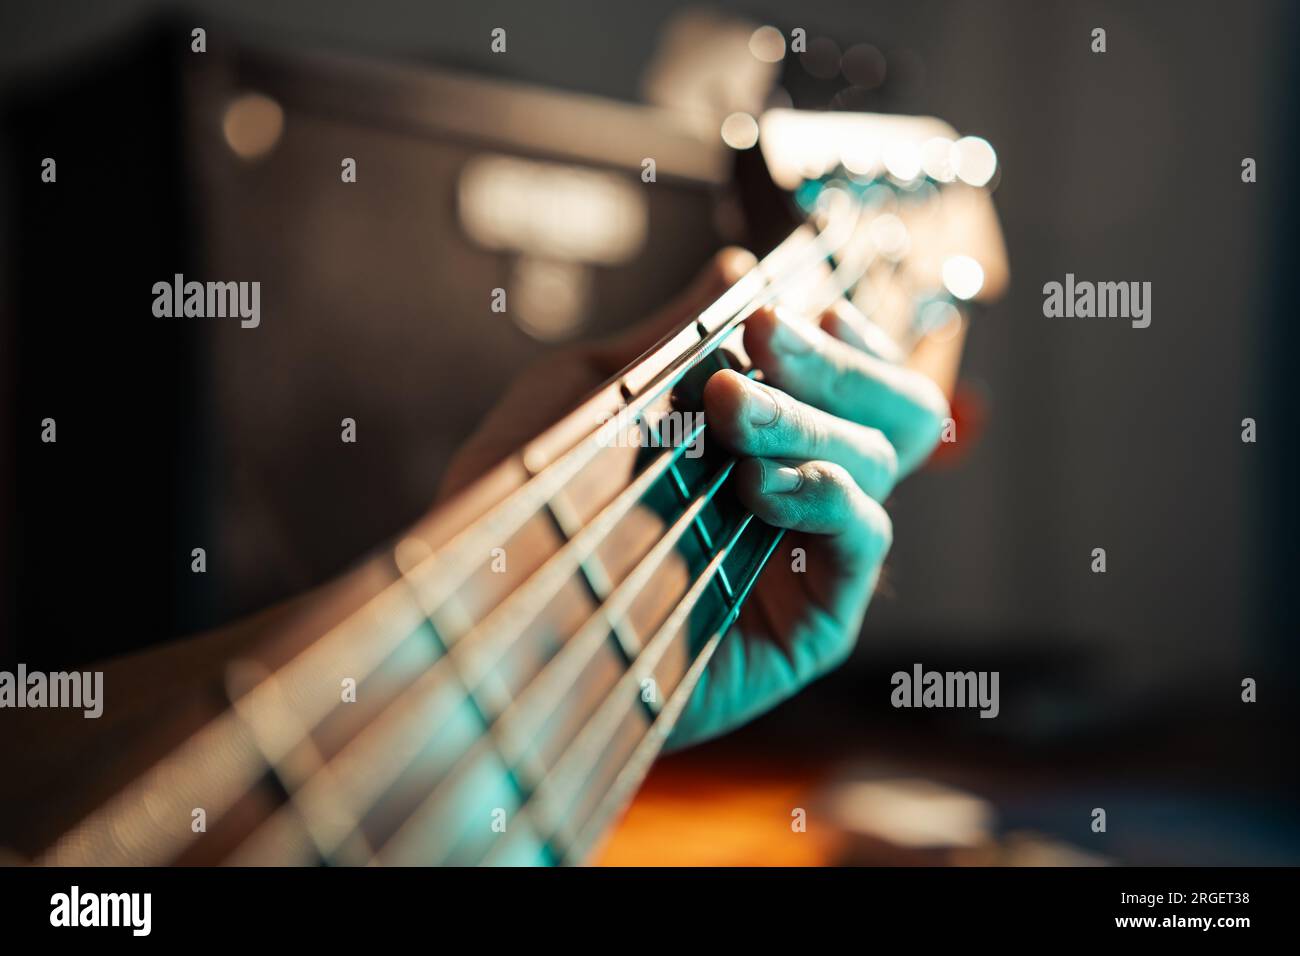 Bassist playing 5 strings bass Stock Photo